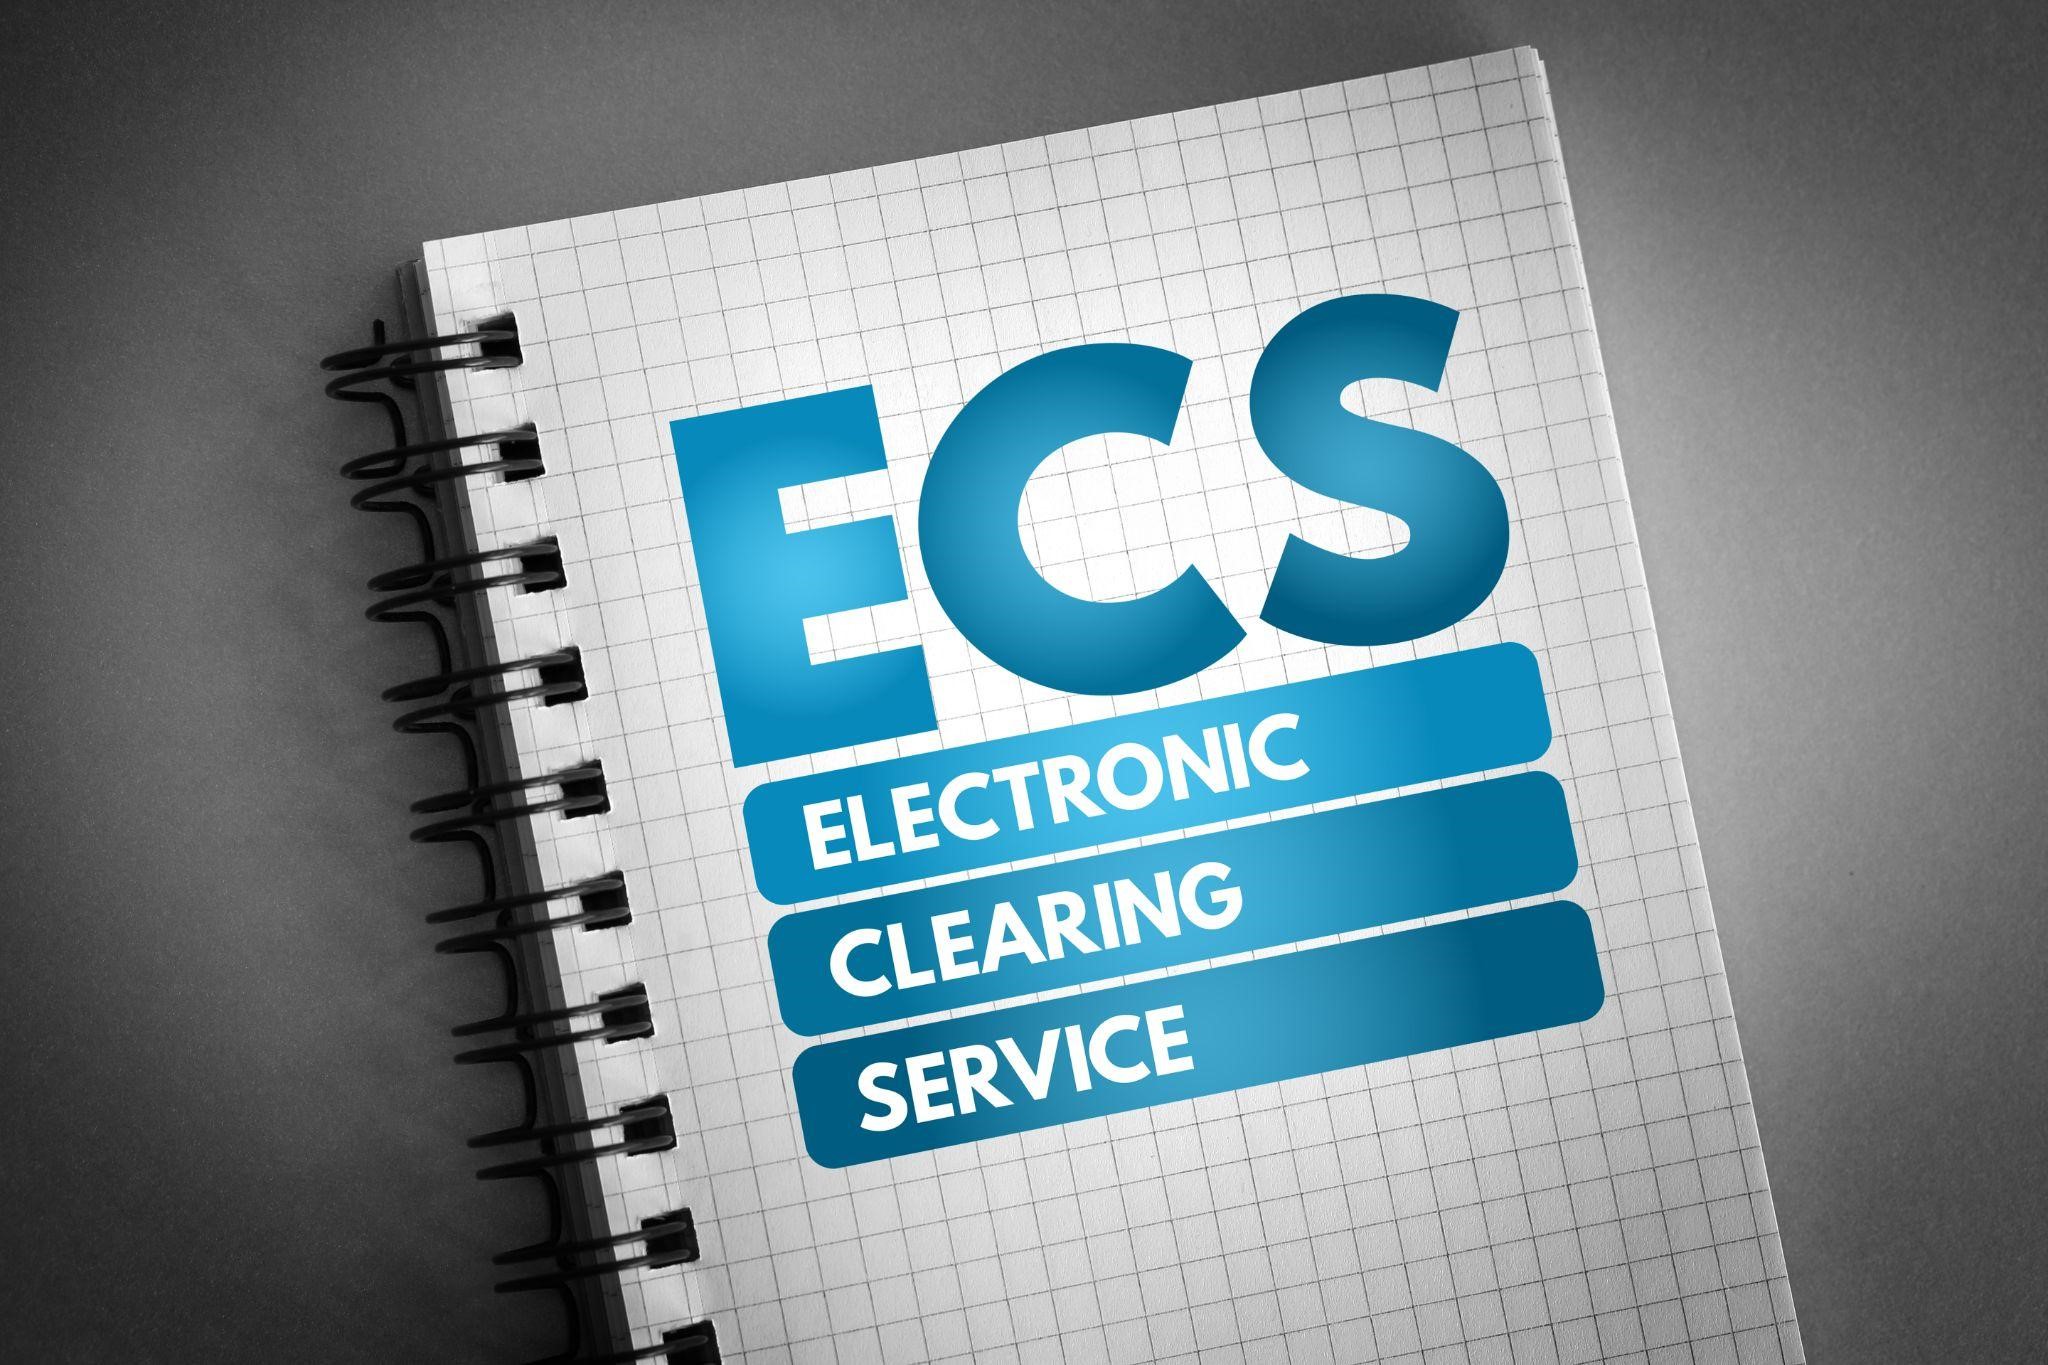 Clear service. Electronic Clearance.